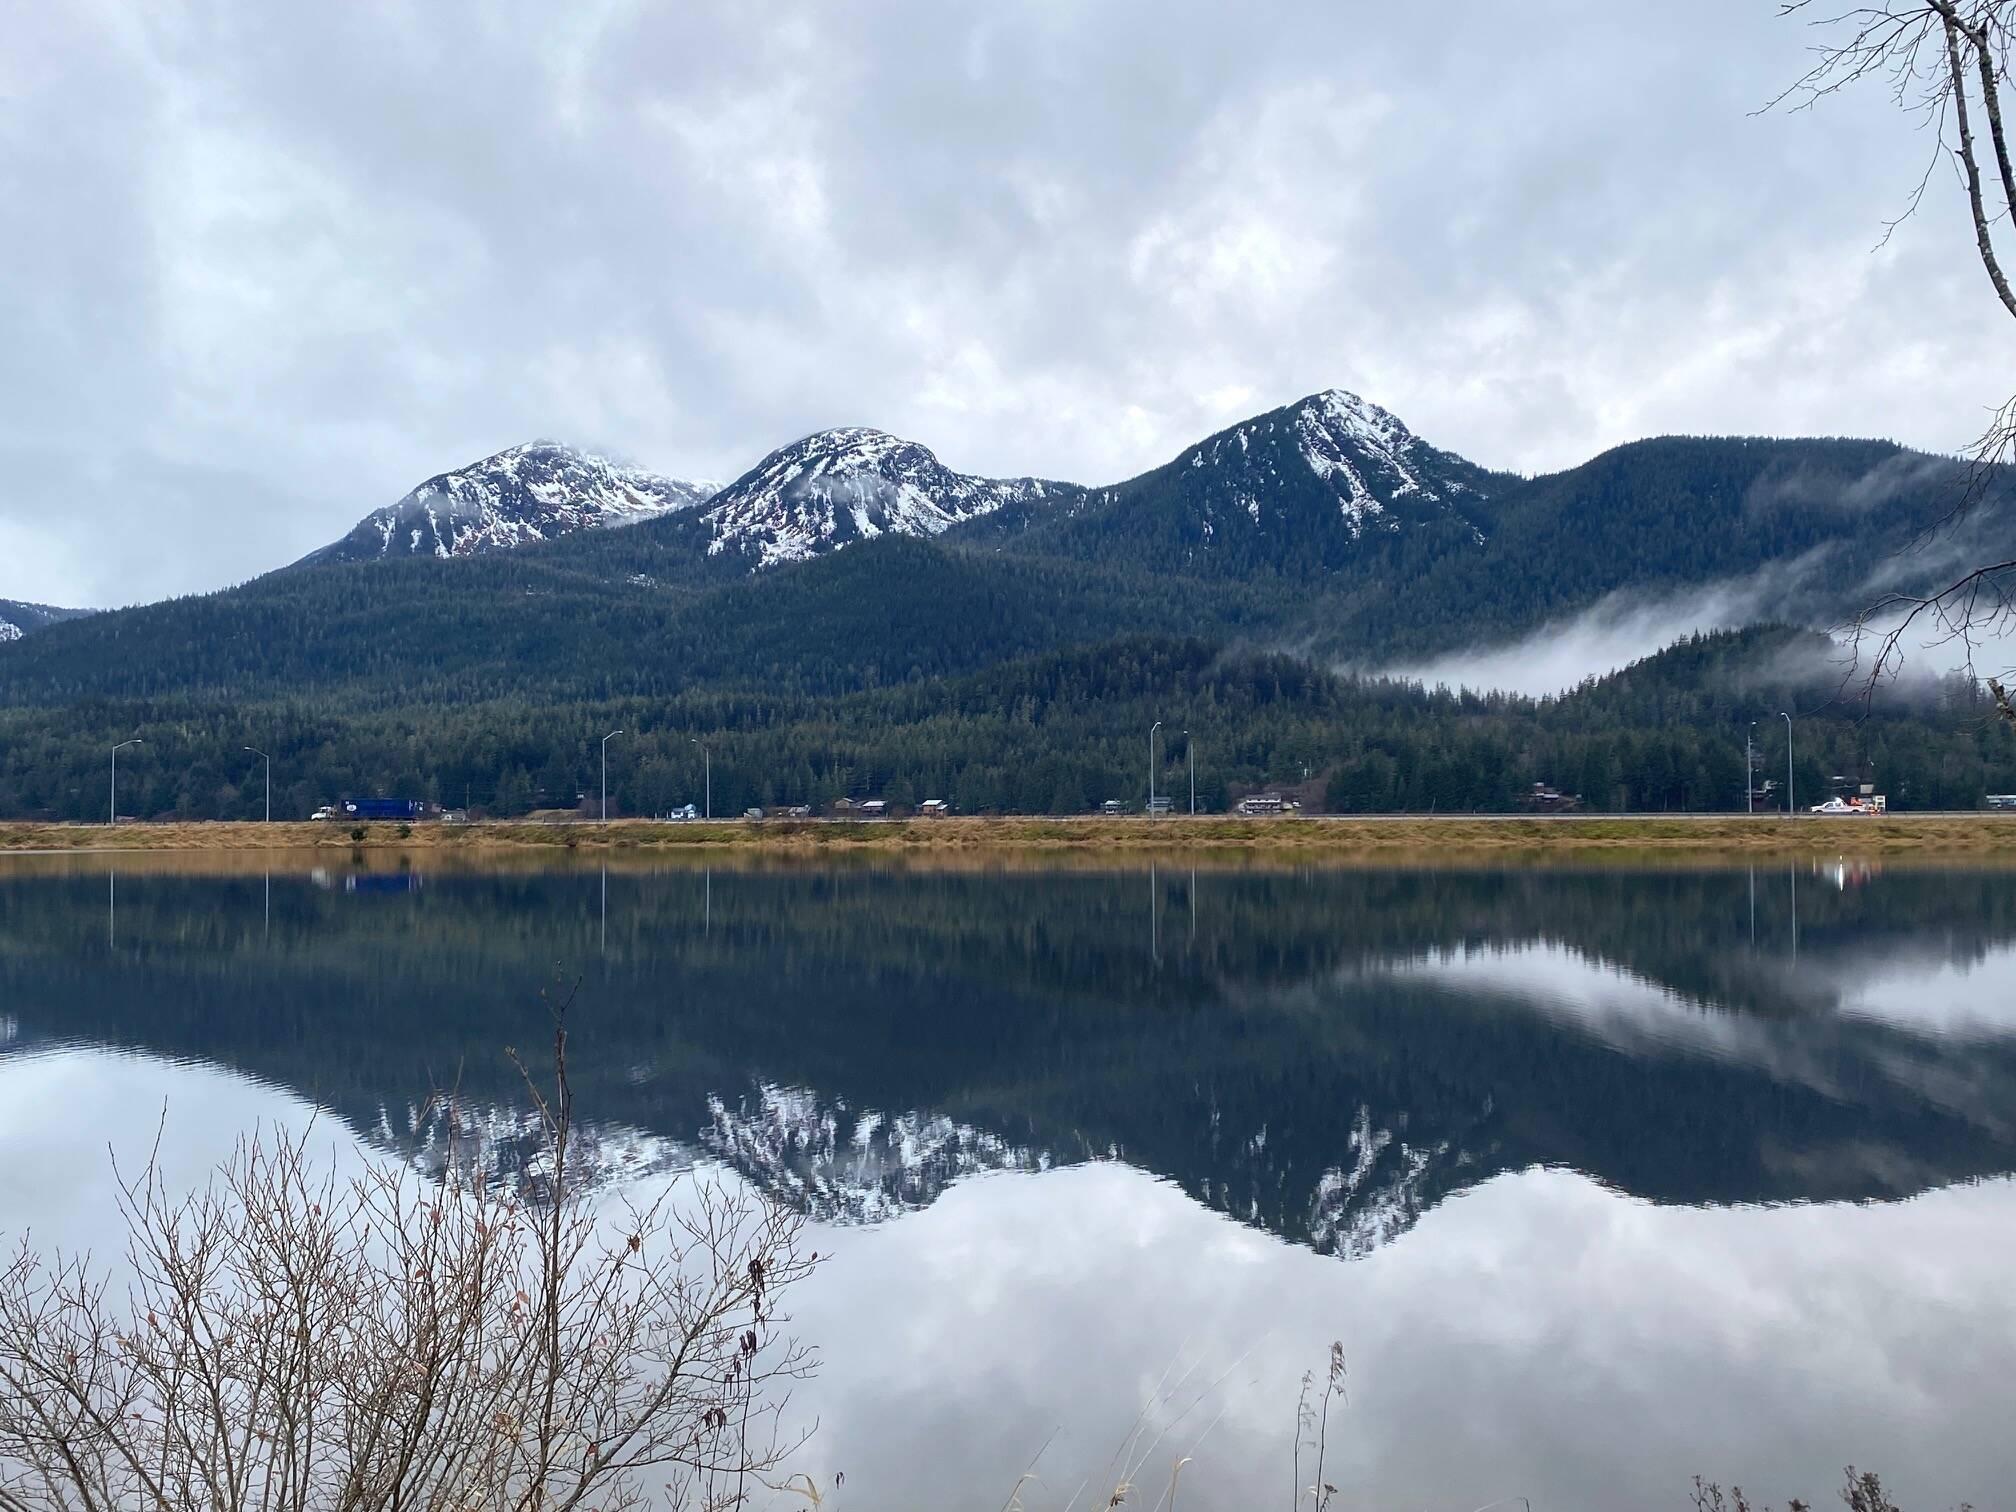 The three sisters — mountains Tabletop, Saddle and Anderson — reflect in Gastineau Channel on Nov. 27. (Photo by Denise Carroll)